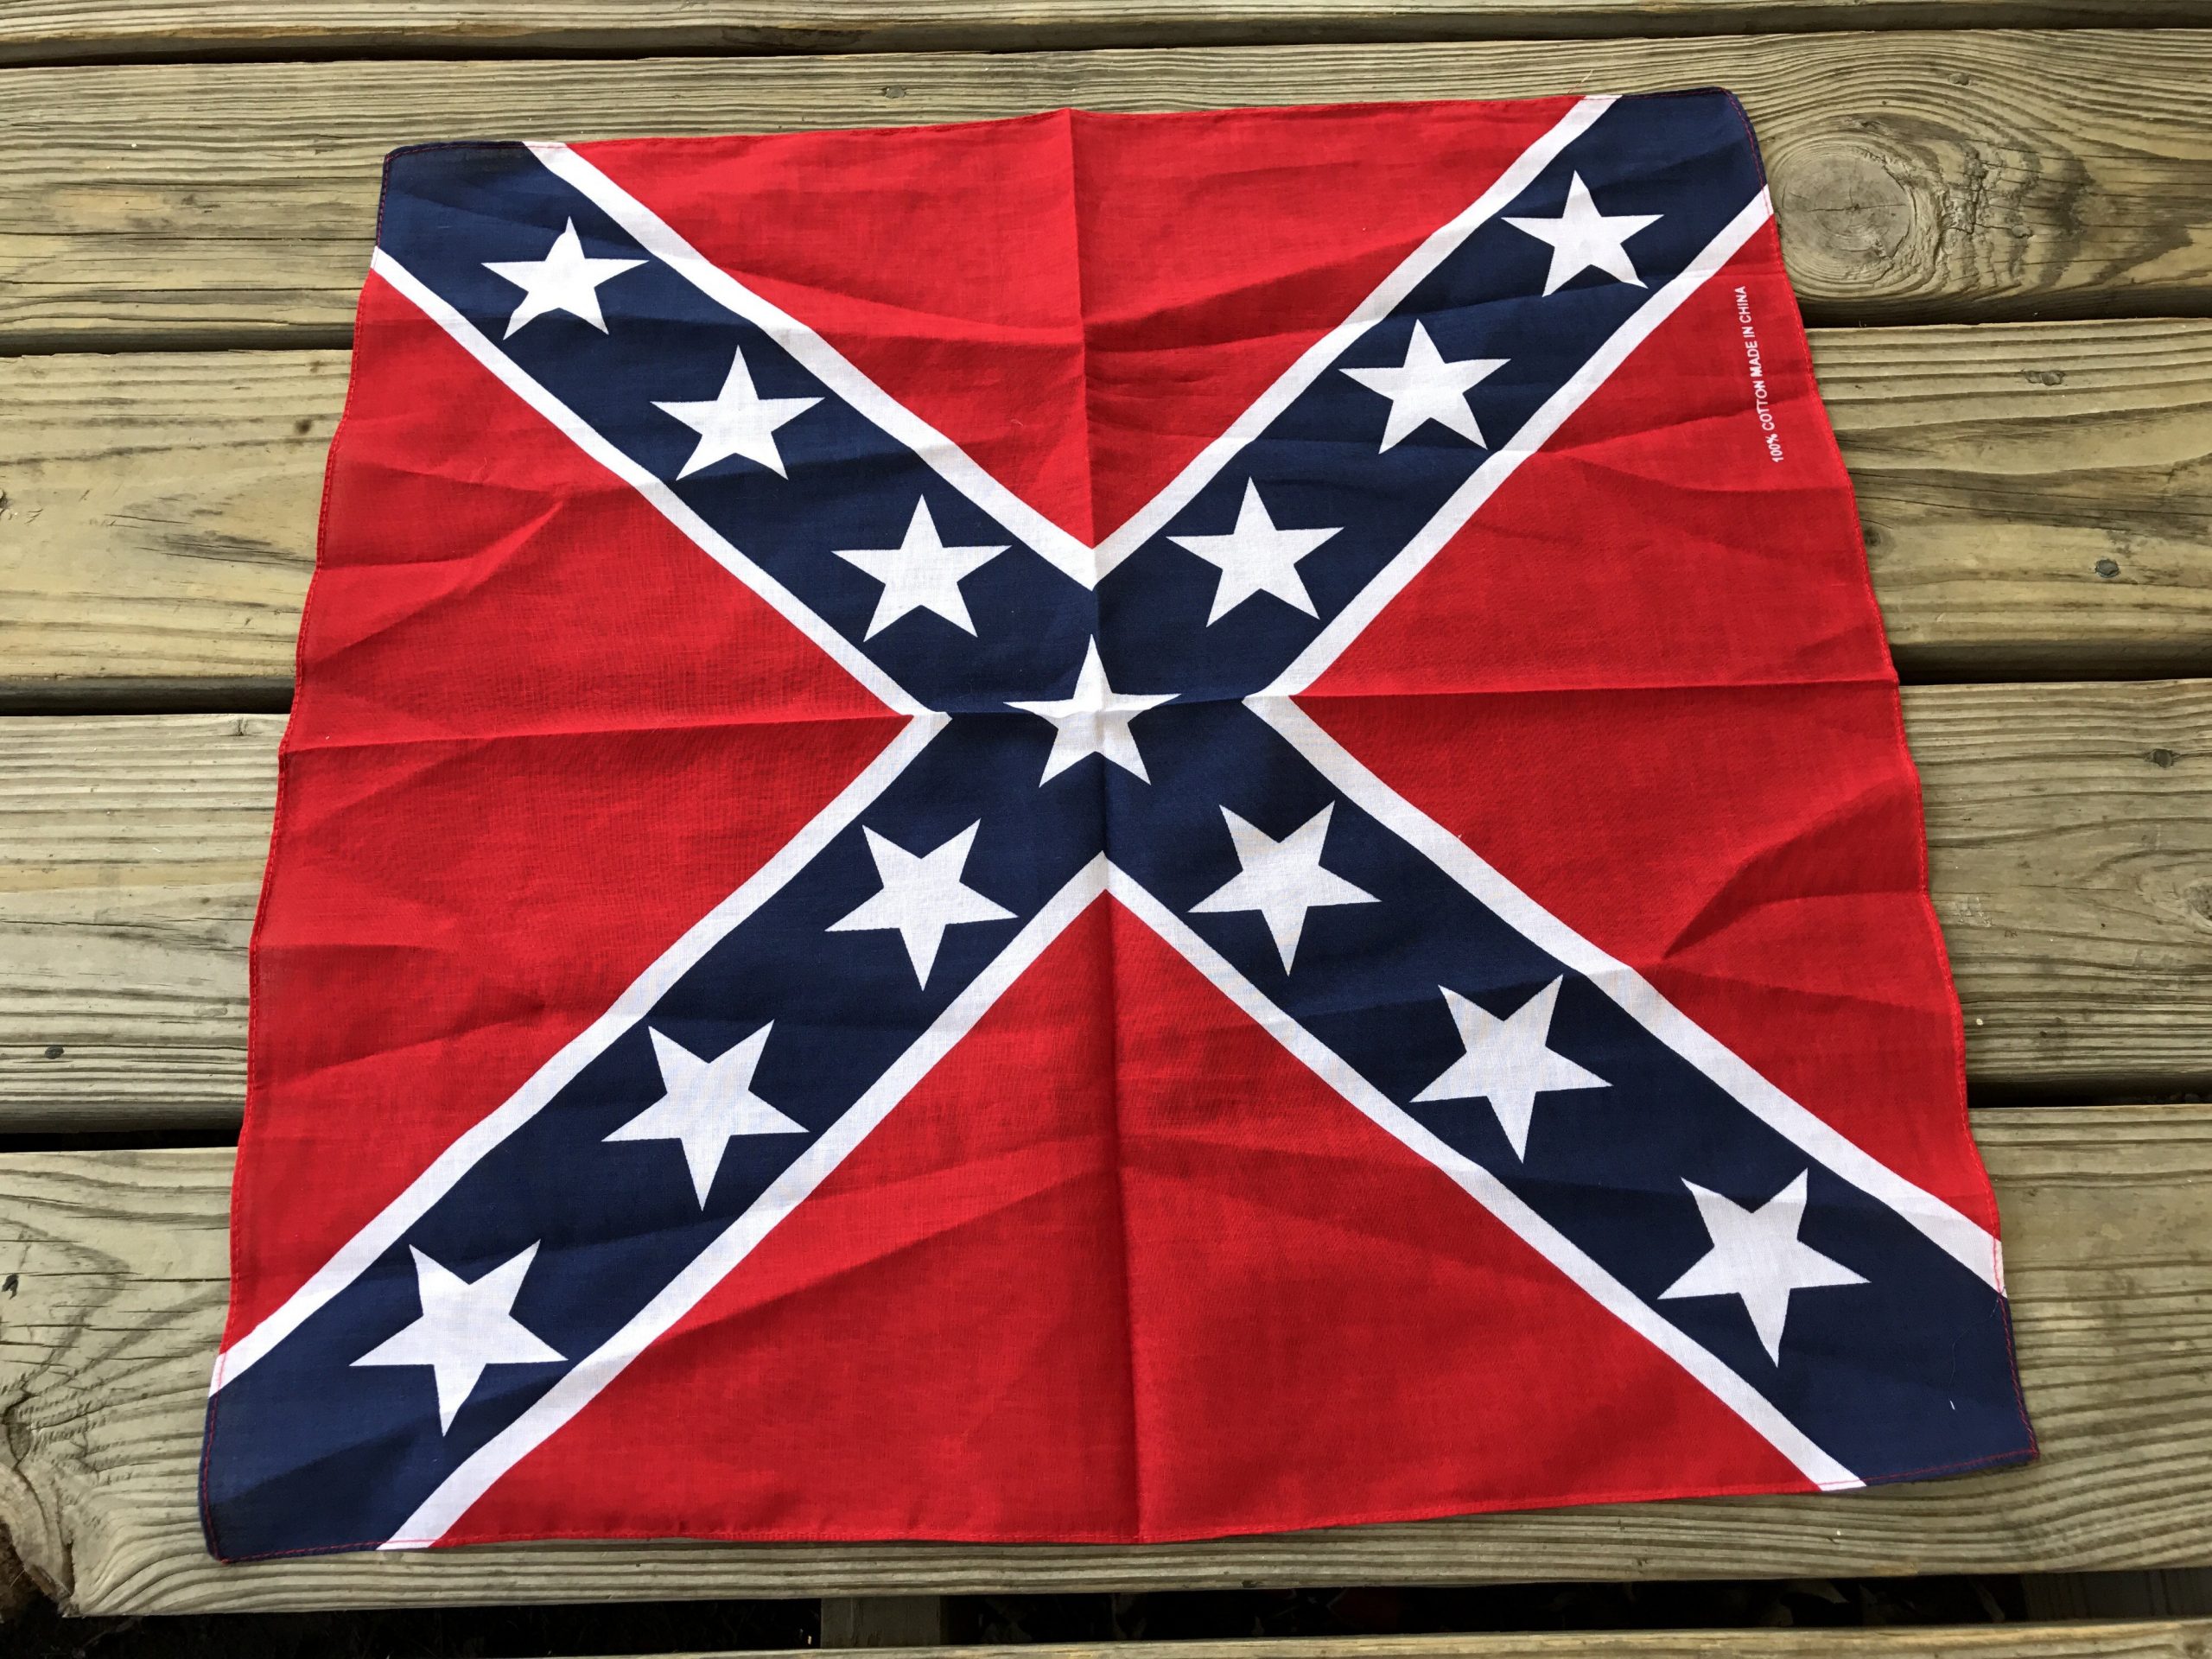 Confederate Flag Quilt For Sale / Confederate bedding set, blankets, bed sh...